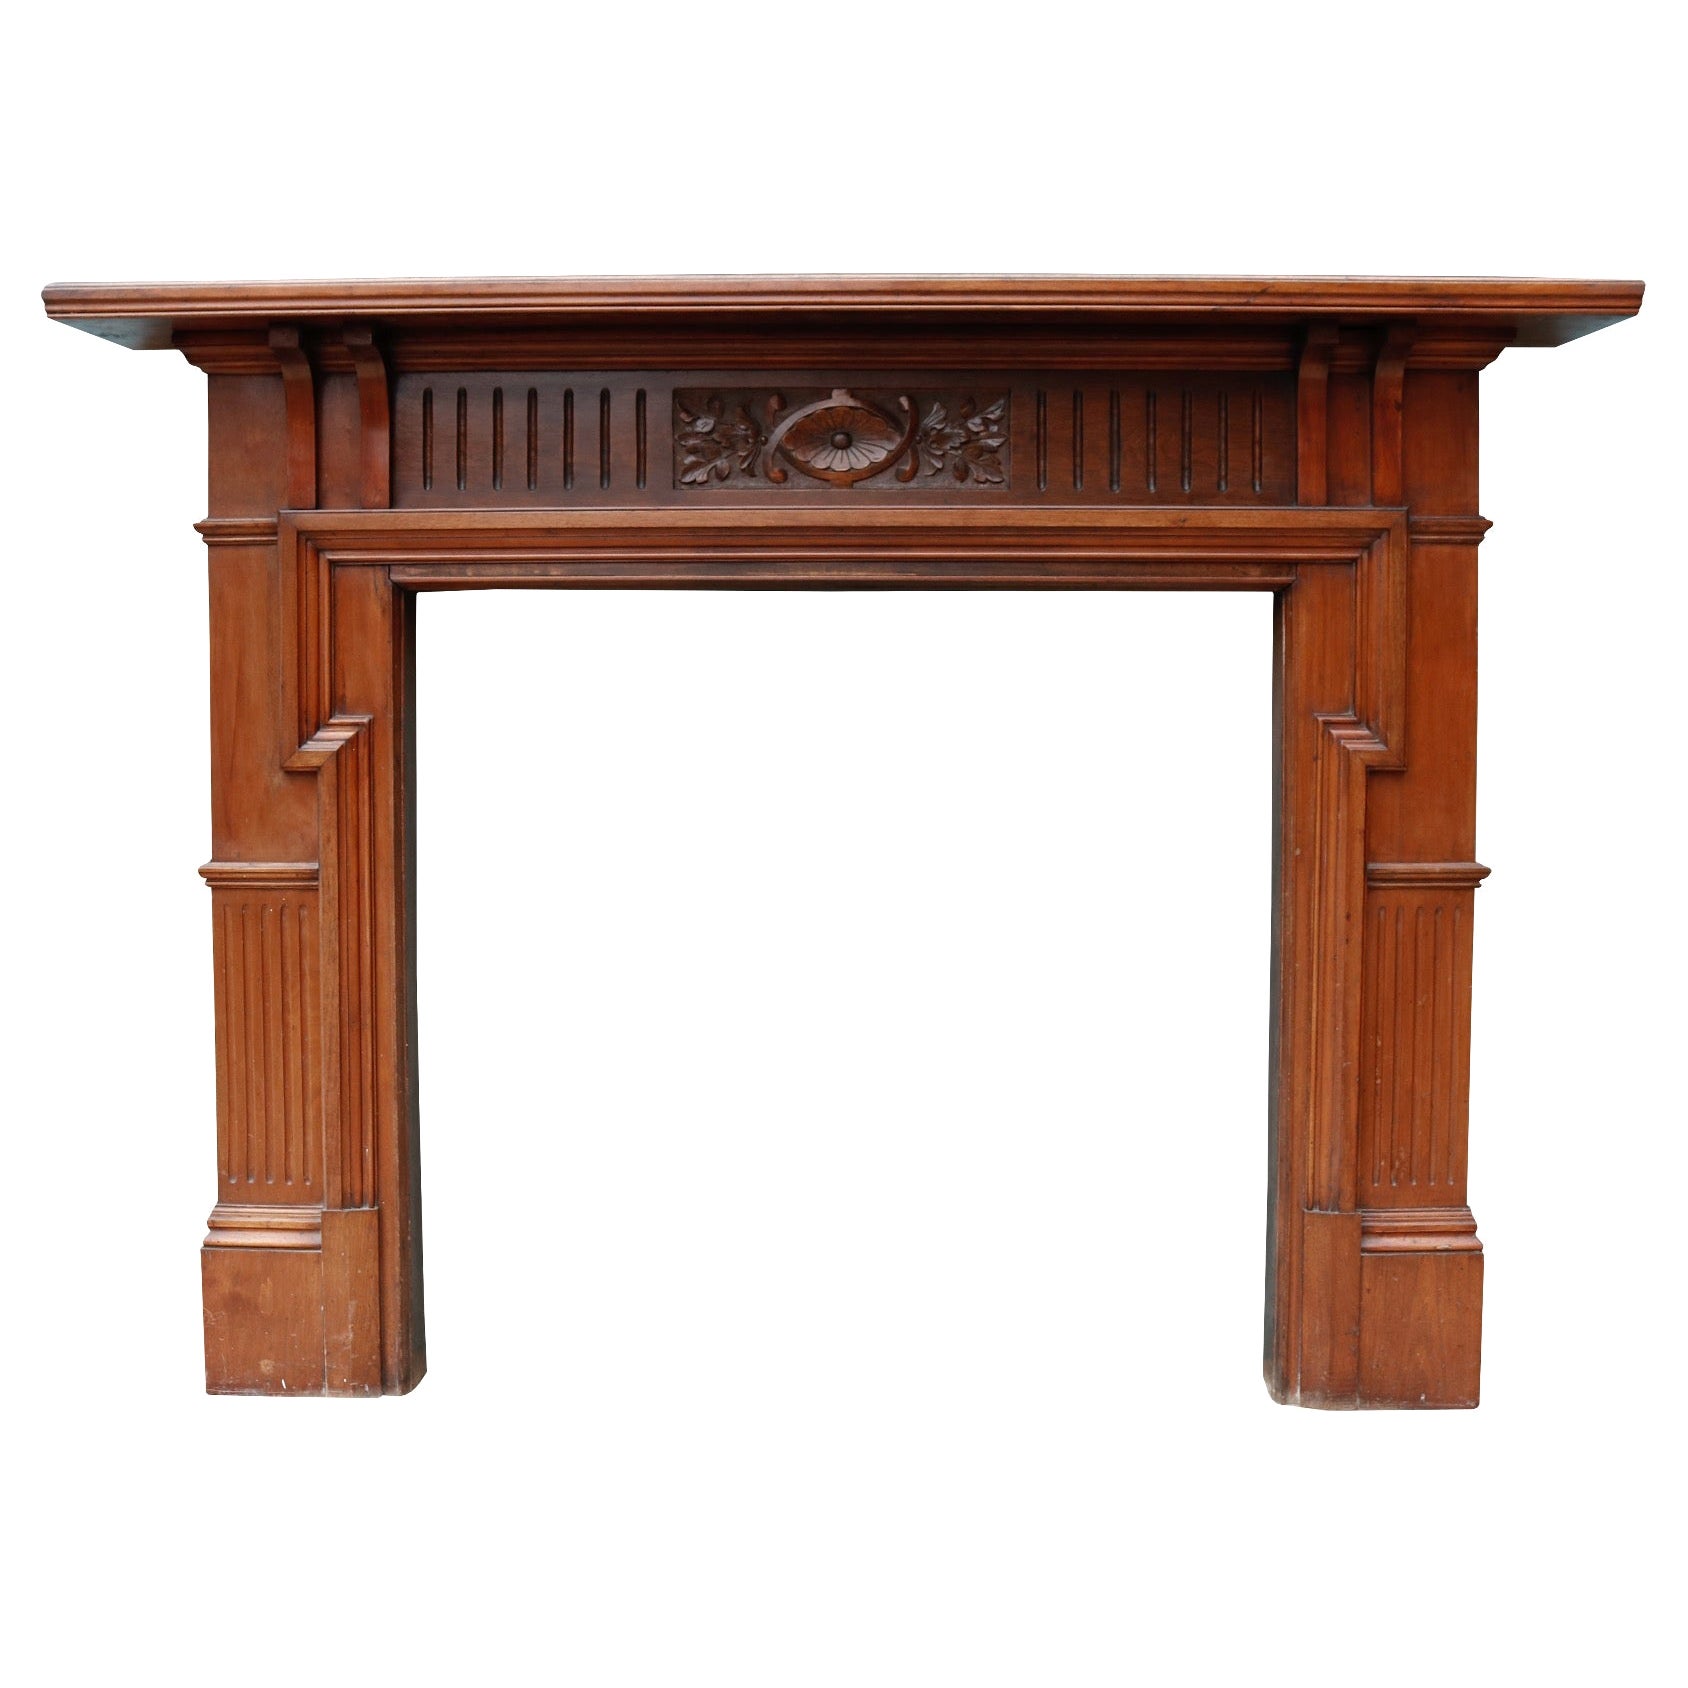 Victorian Style Reclaimed Walnut Mantel For Sale